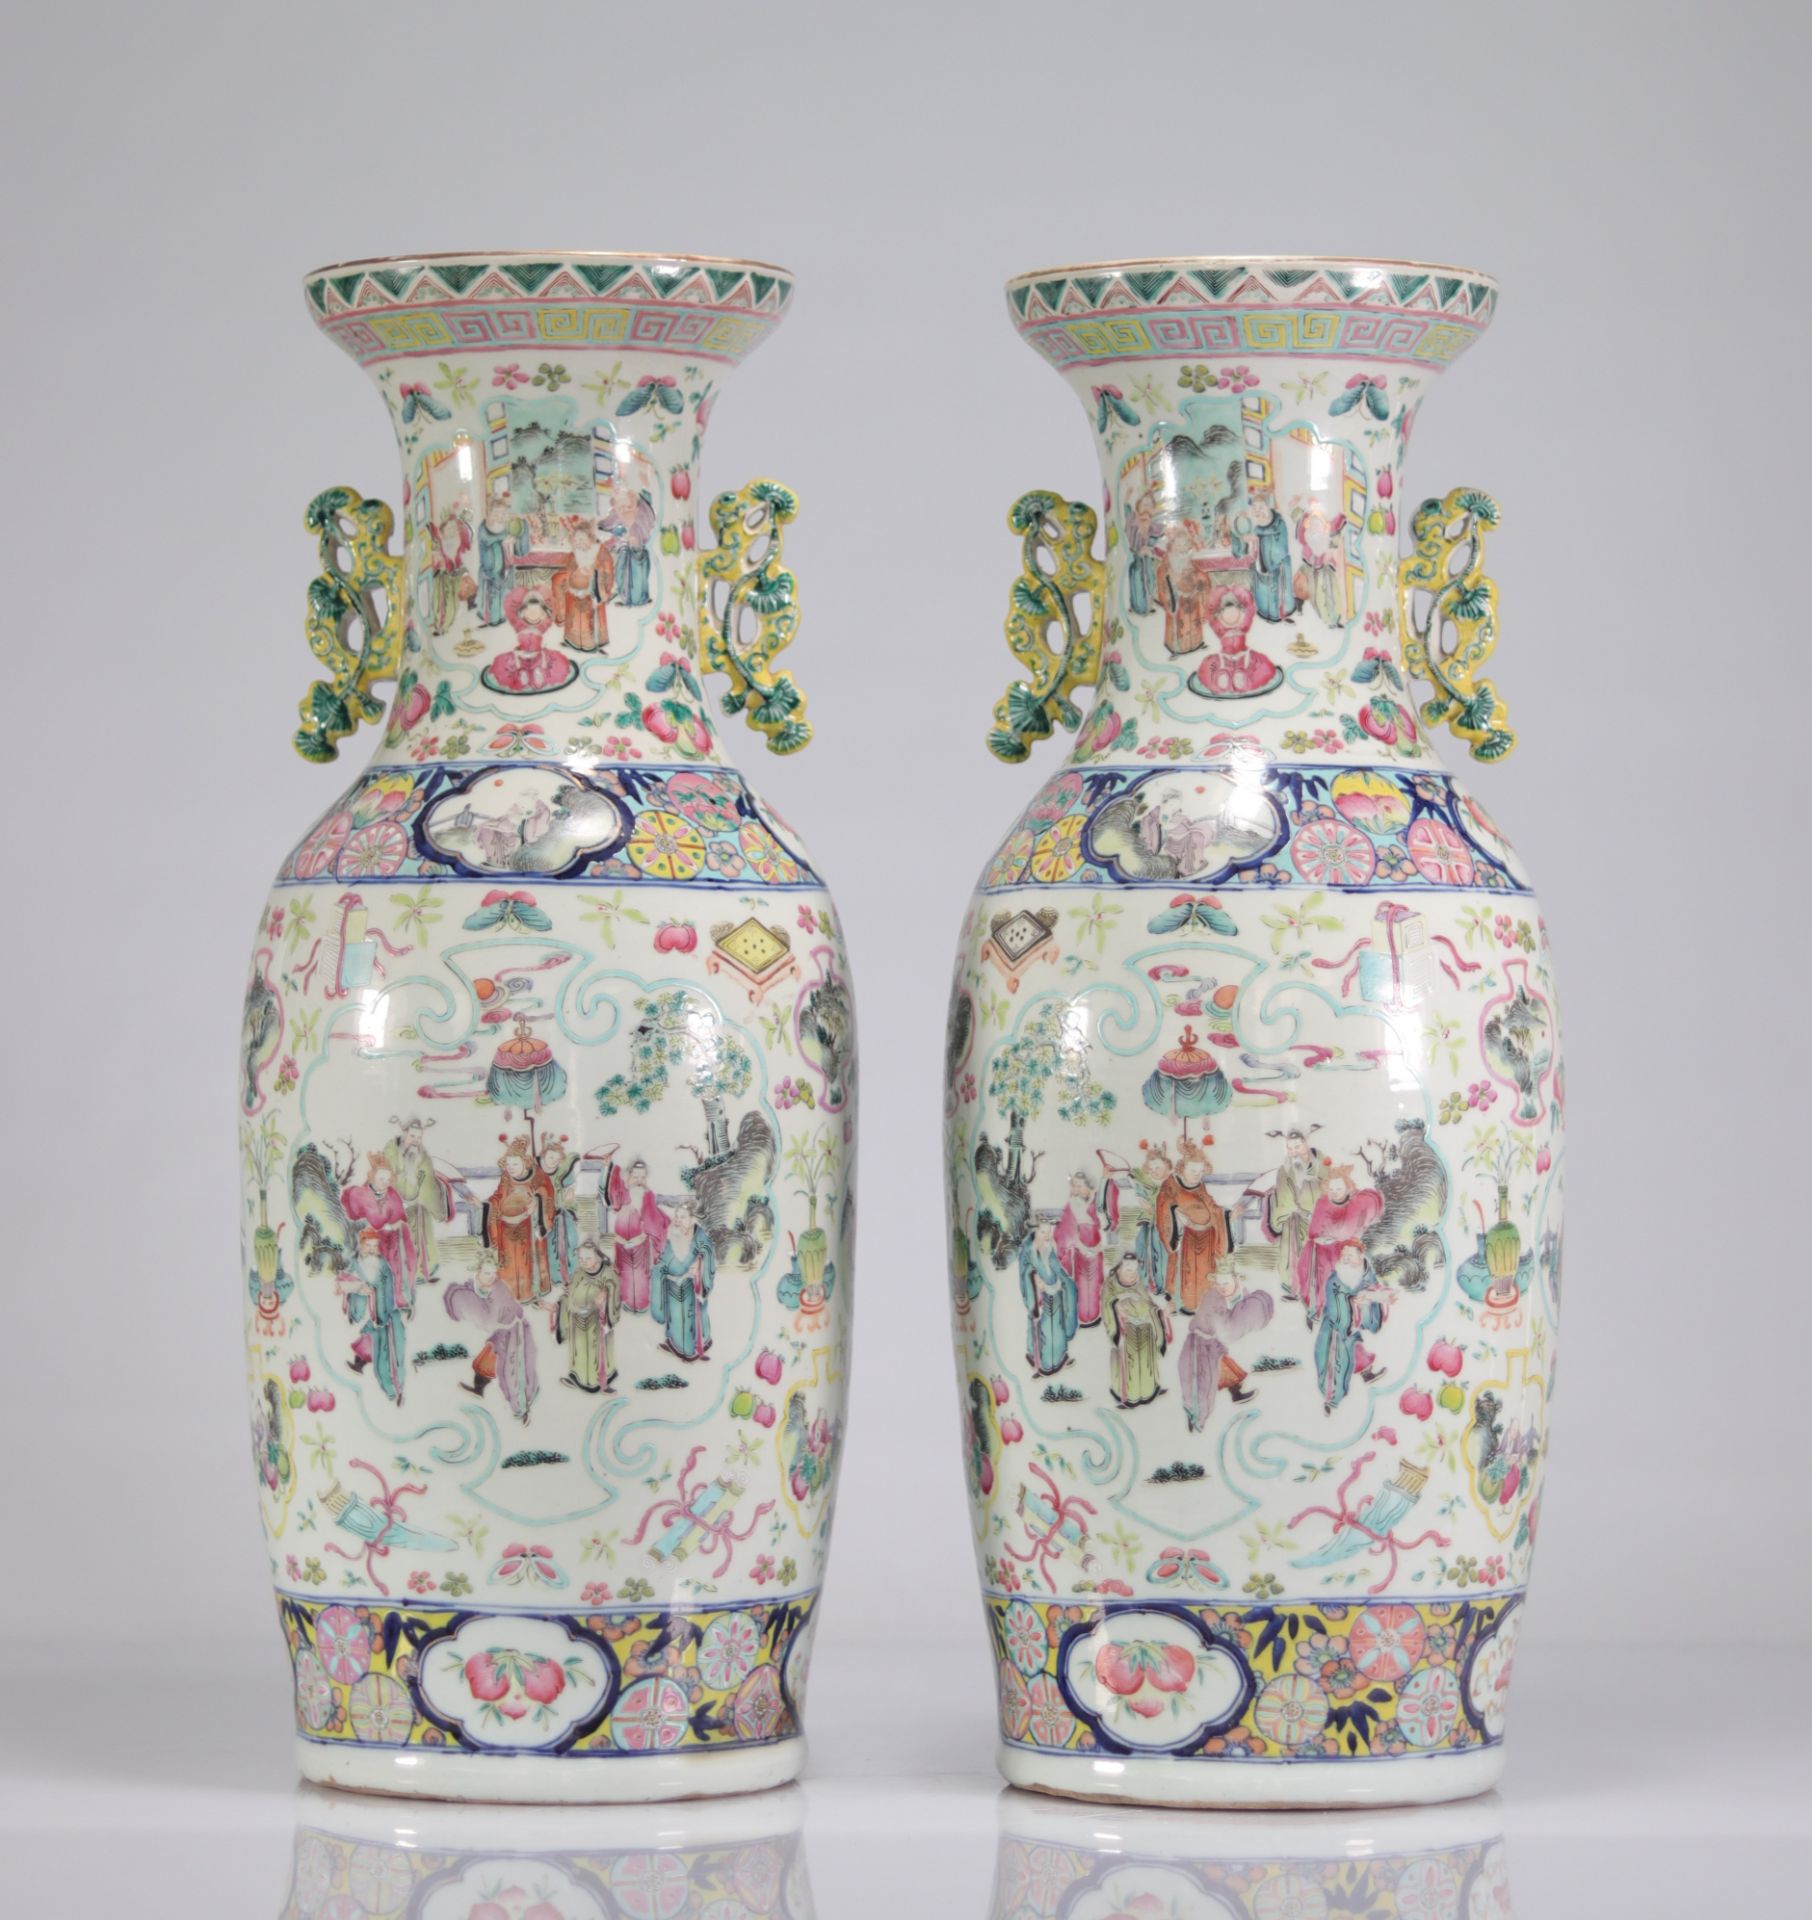 Pair of 19th century Rose family vases - Image 5 of 6